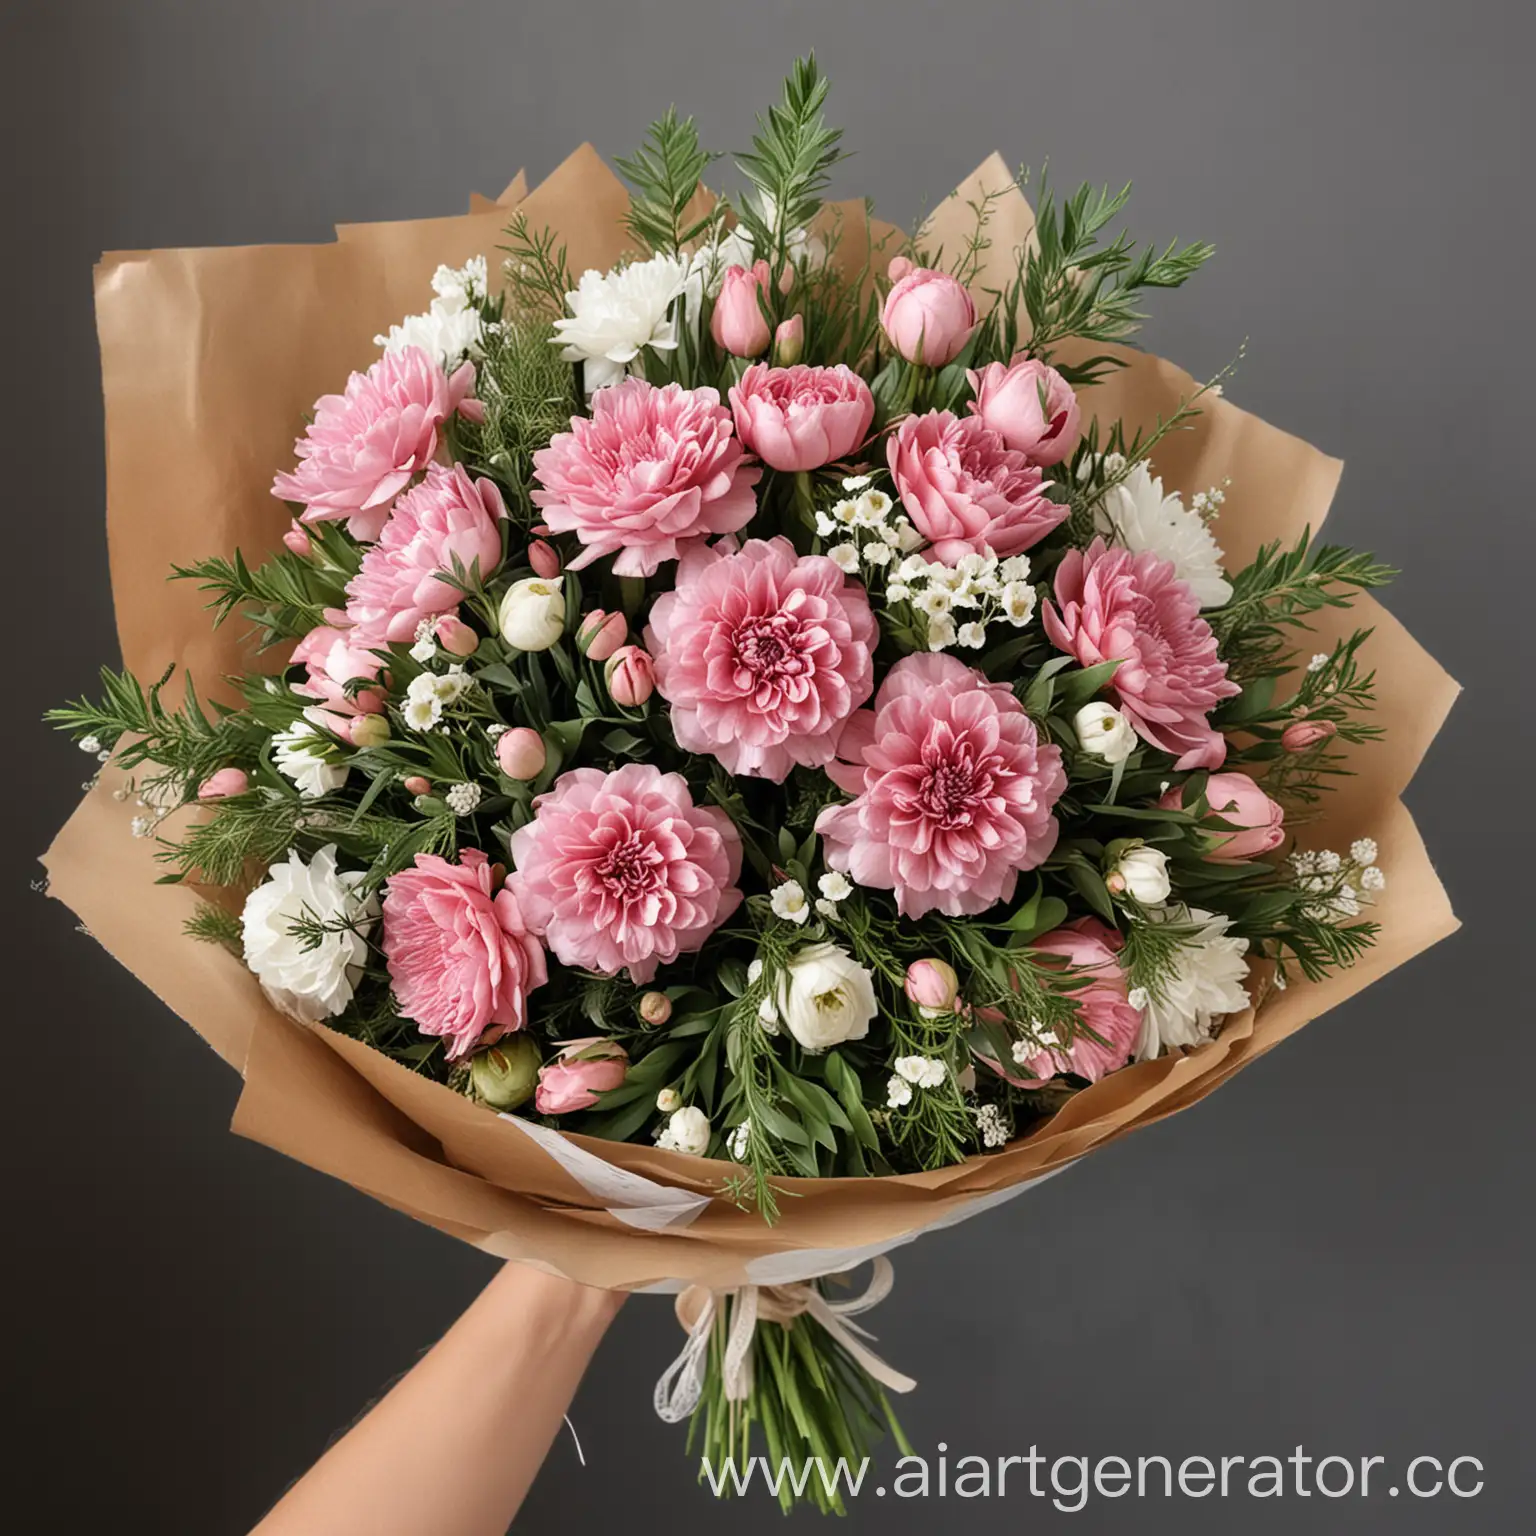 Realistic-Bouquet-of-Peonies-in-Full-Bloom